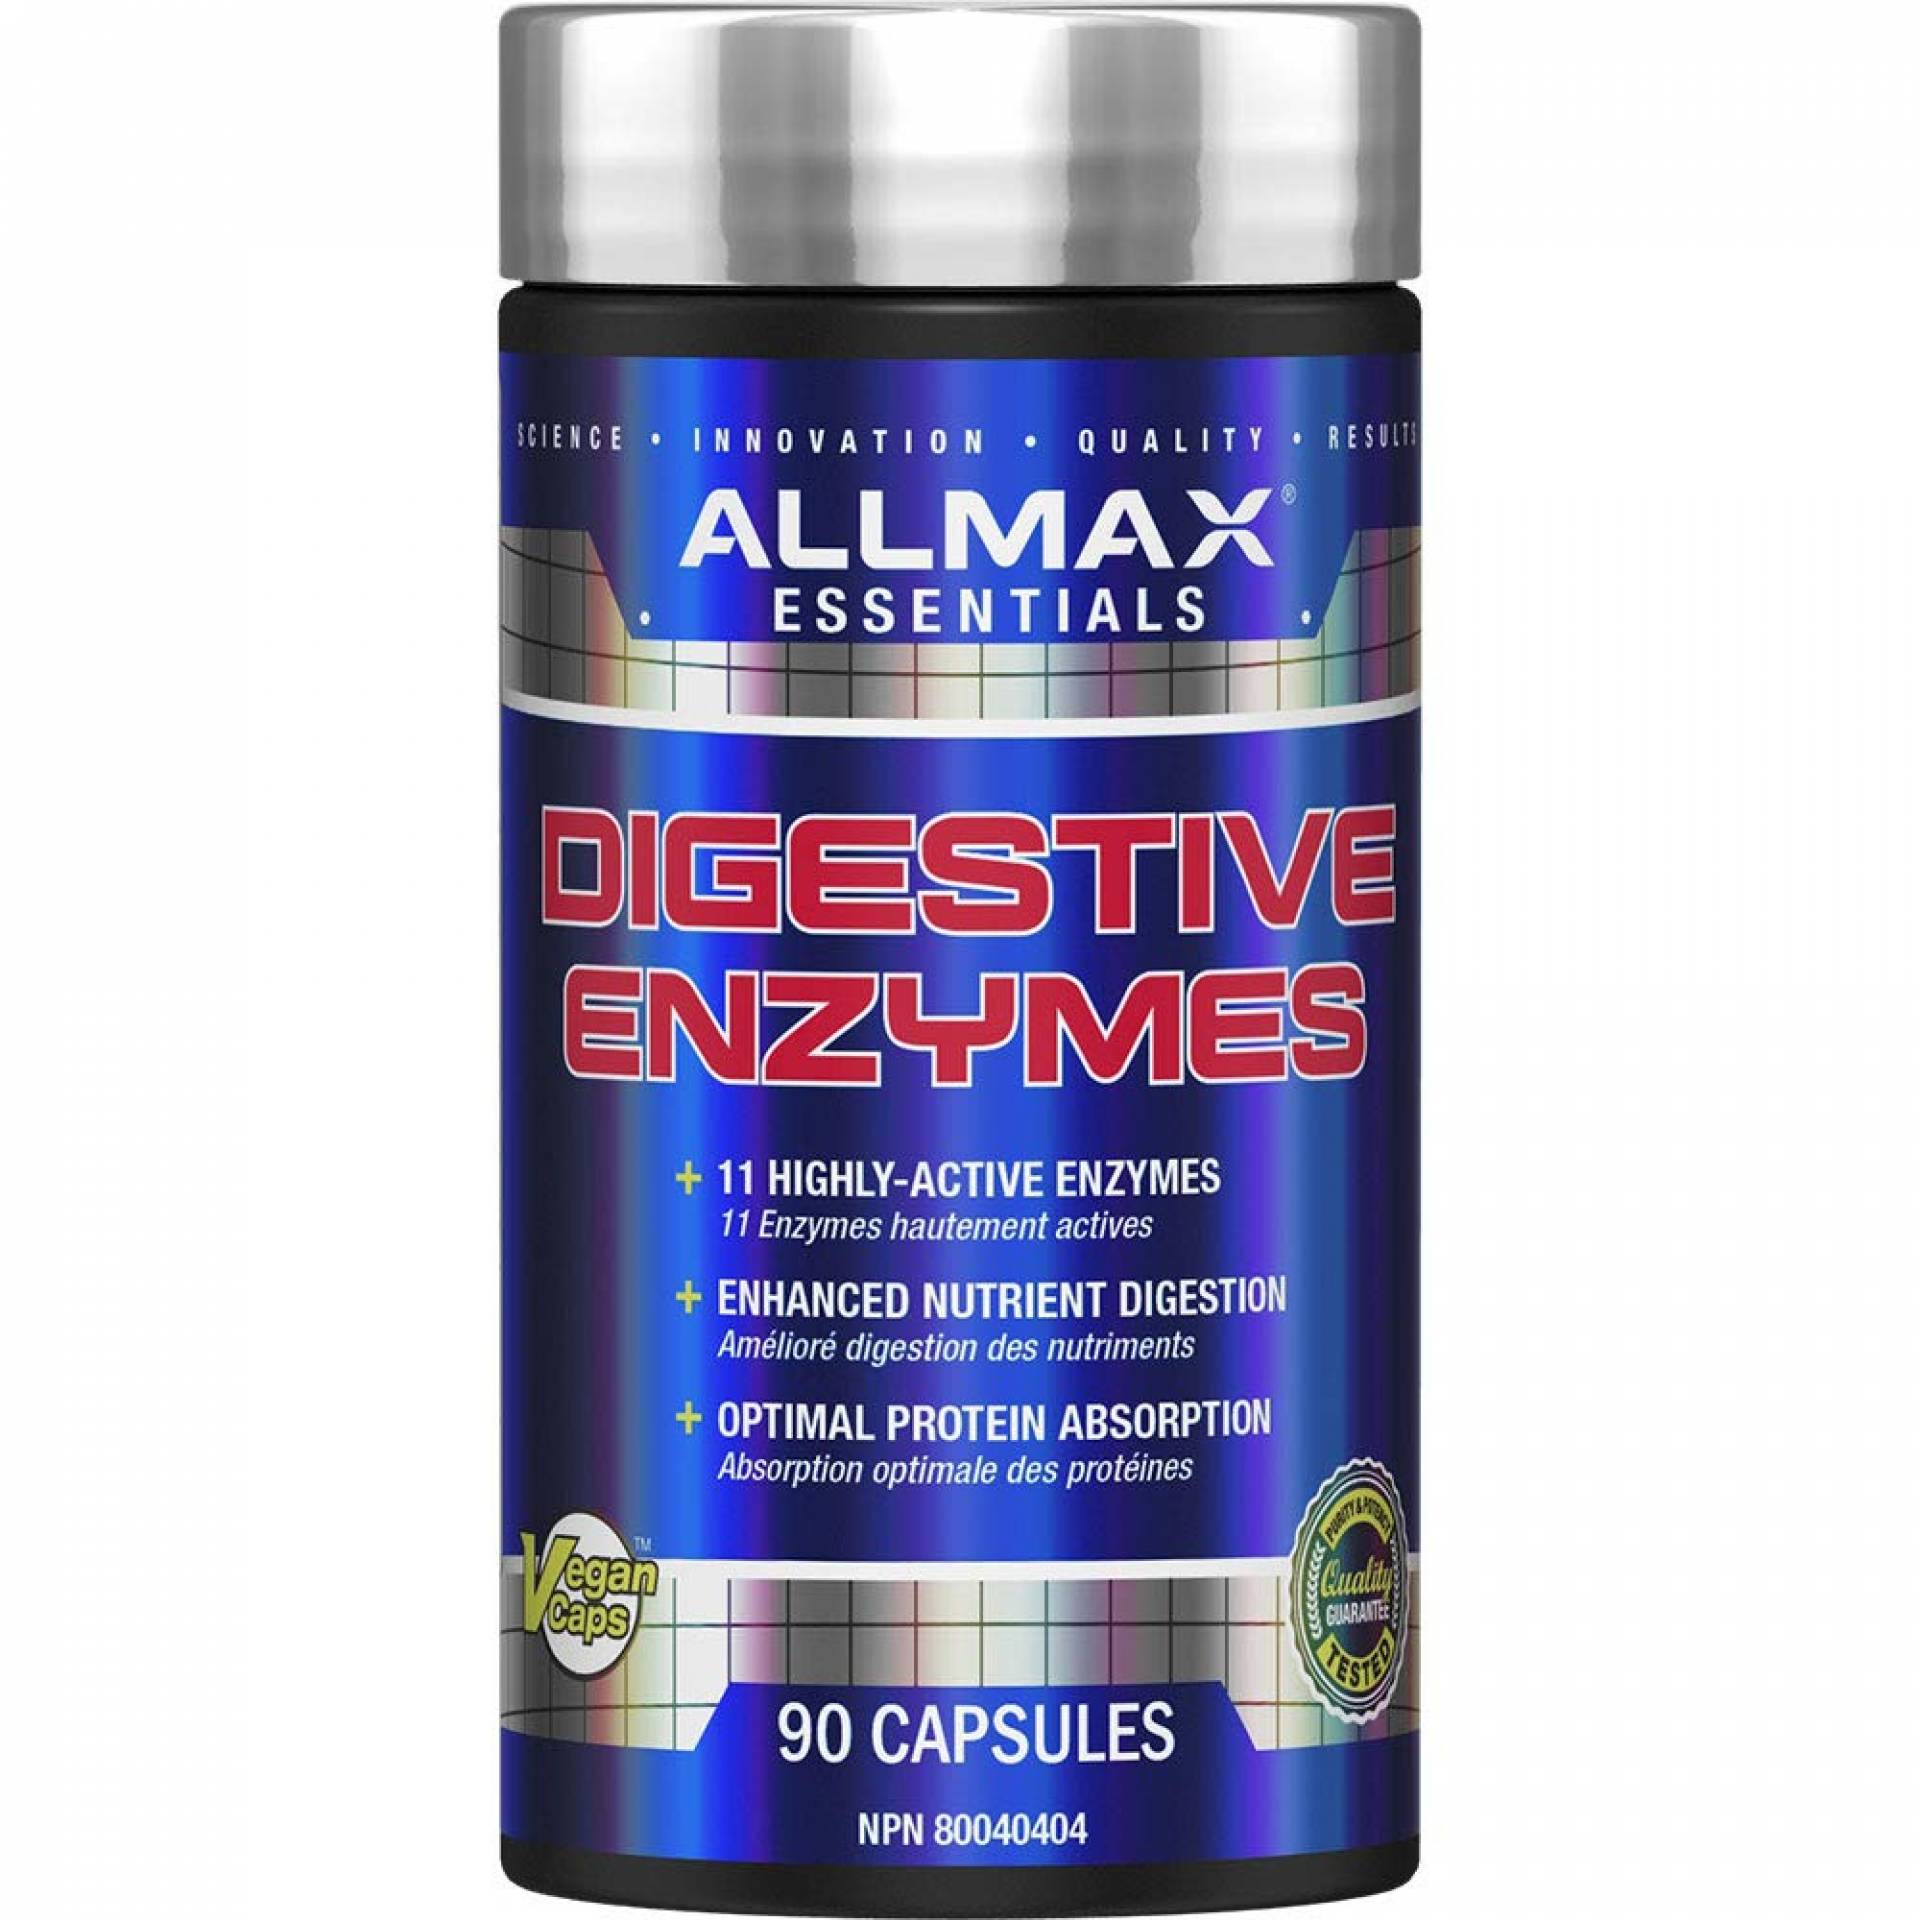 Allmax Digestive Enzyme Capsules - $31.99